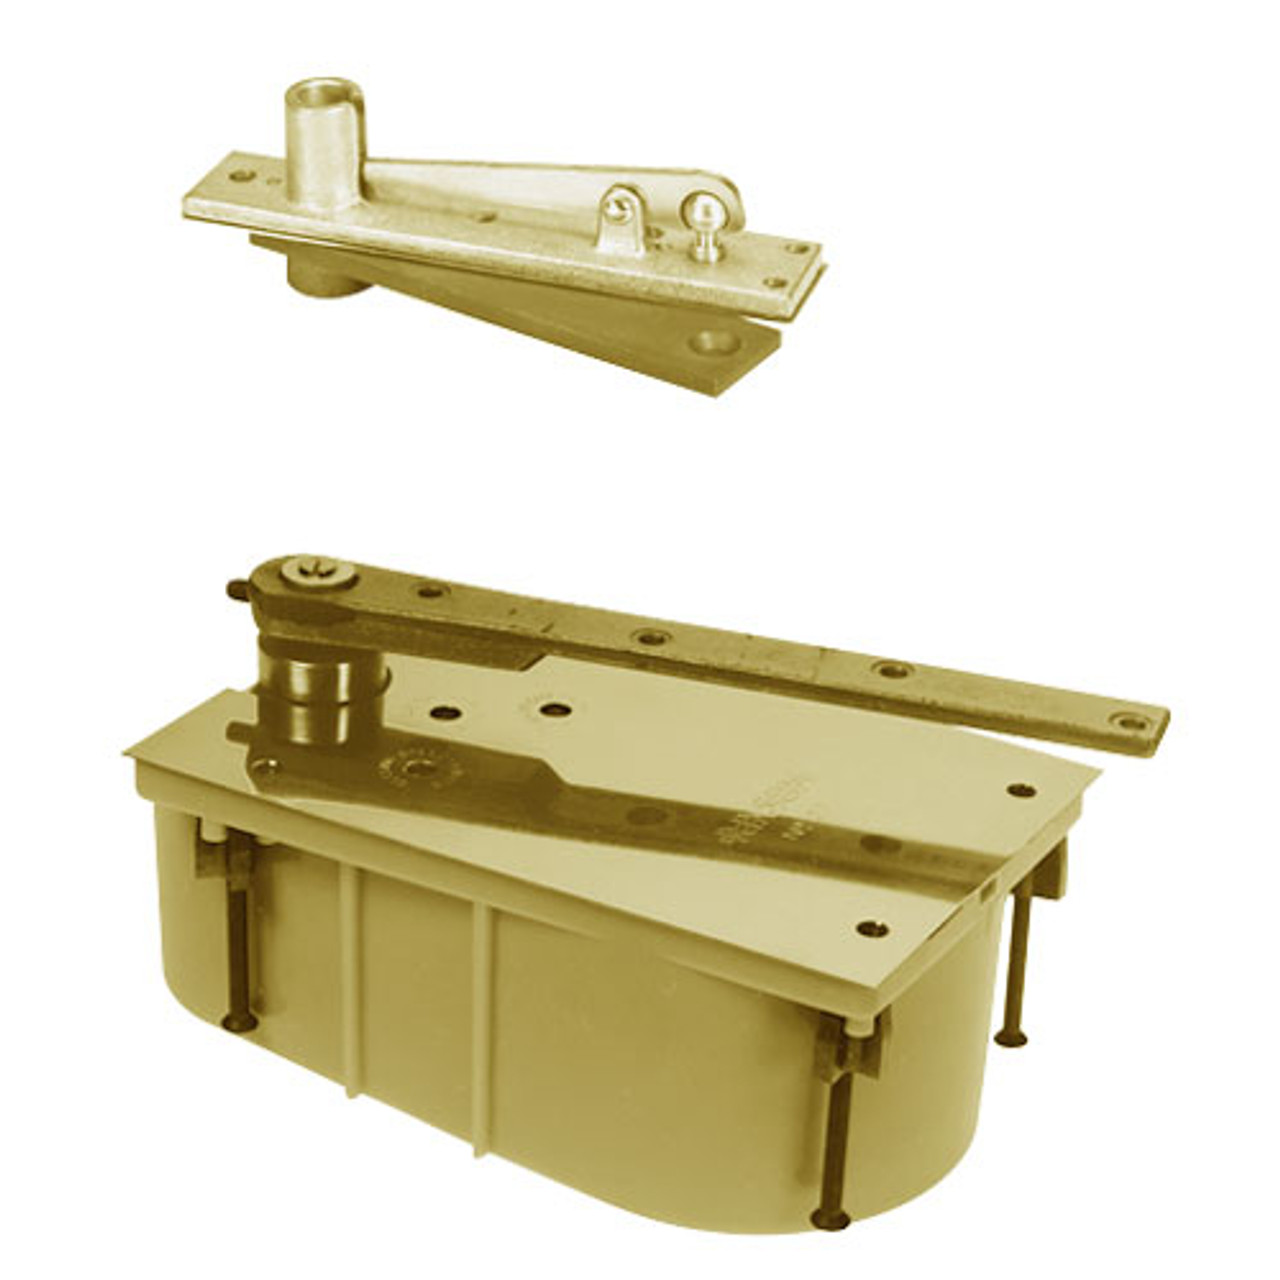 28-95N-554-LFP-CWF-RH-606 Rixson 28 Series Heavy Duty Single Acting Center Hung Floor Closer with Concealed Arm in Satin Brass Finish